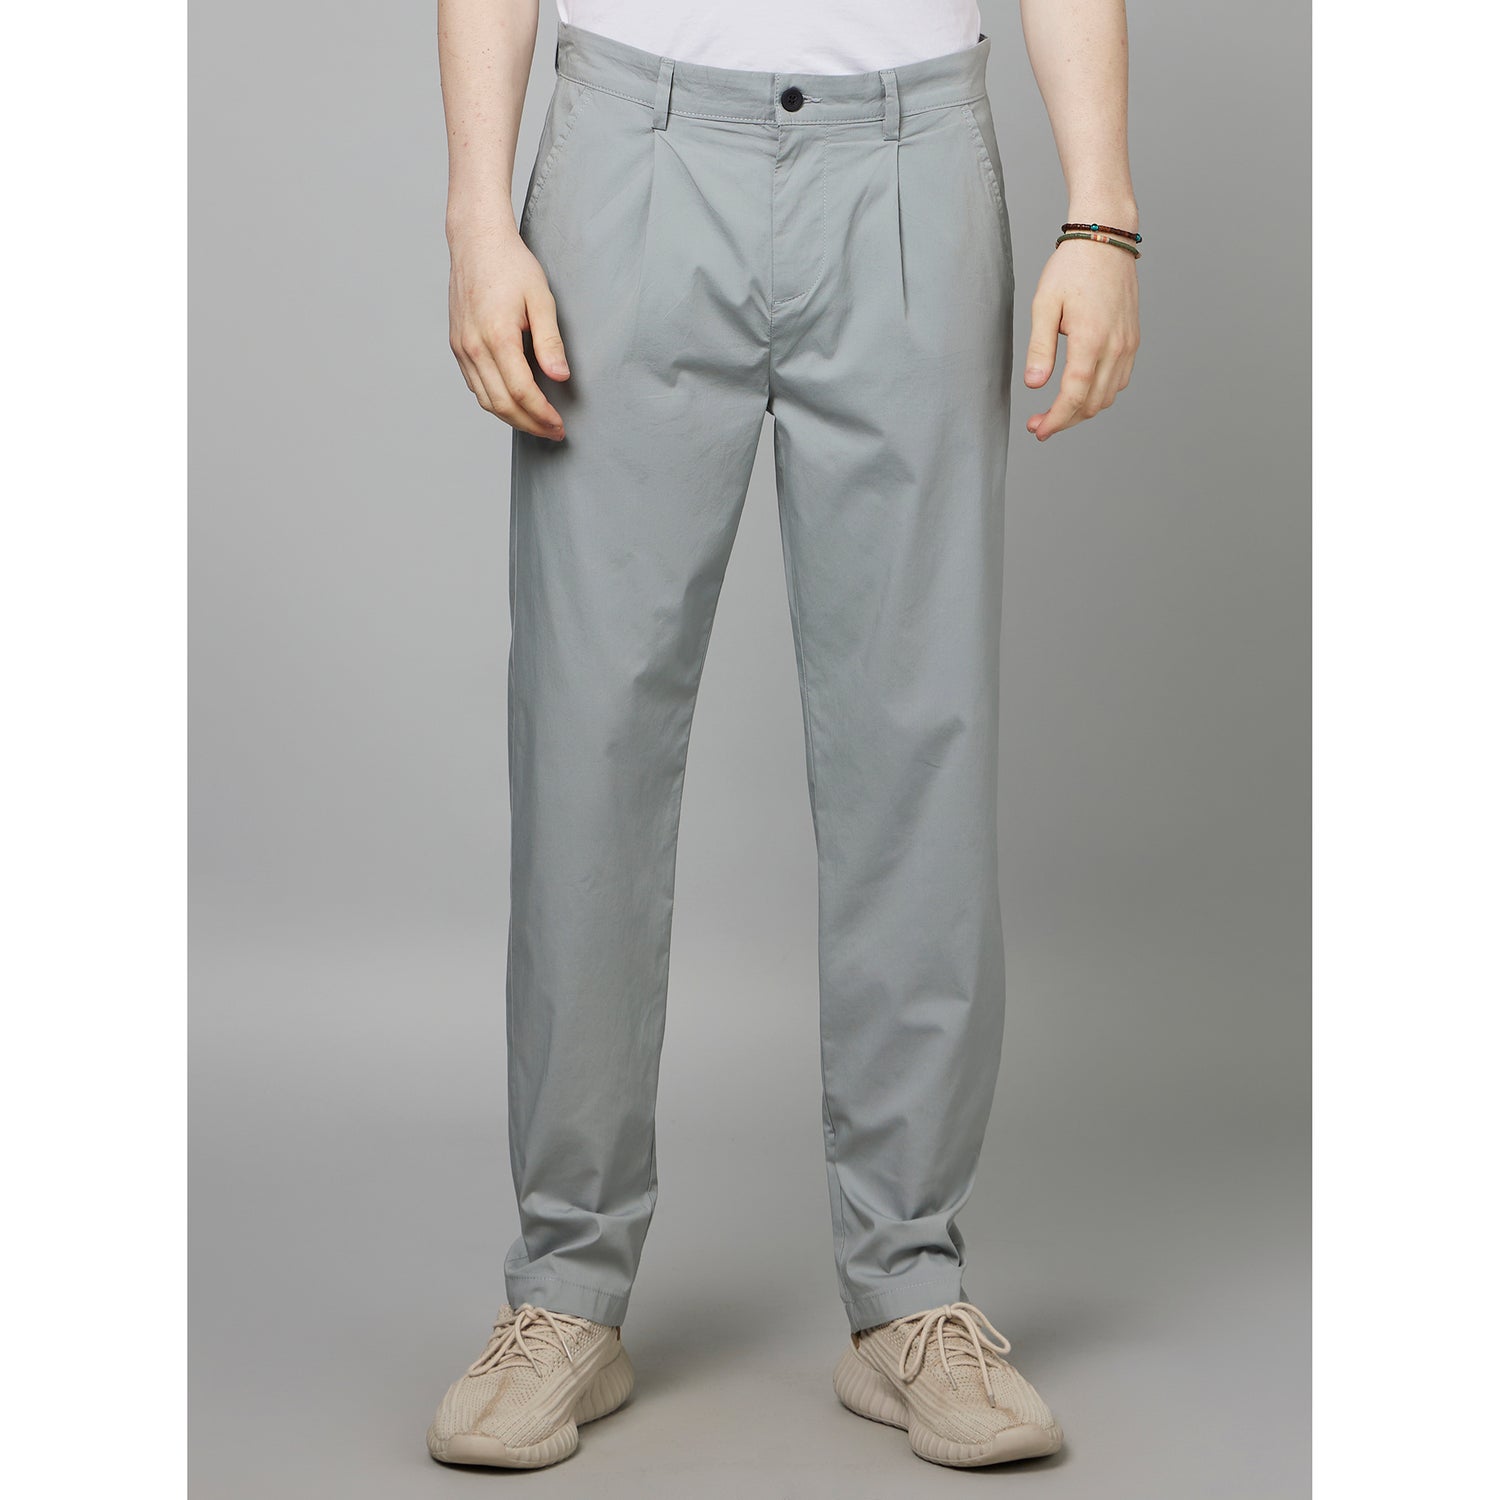 Grey Classic Loose Fit Pleated Cotton Trousers (FOCHI)